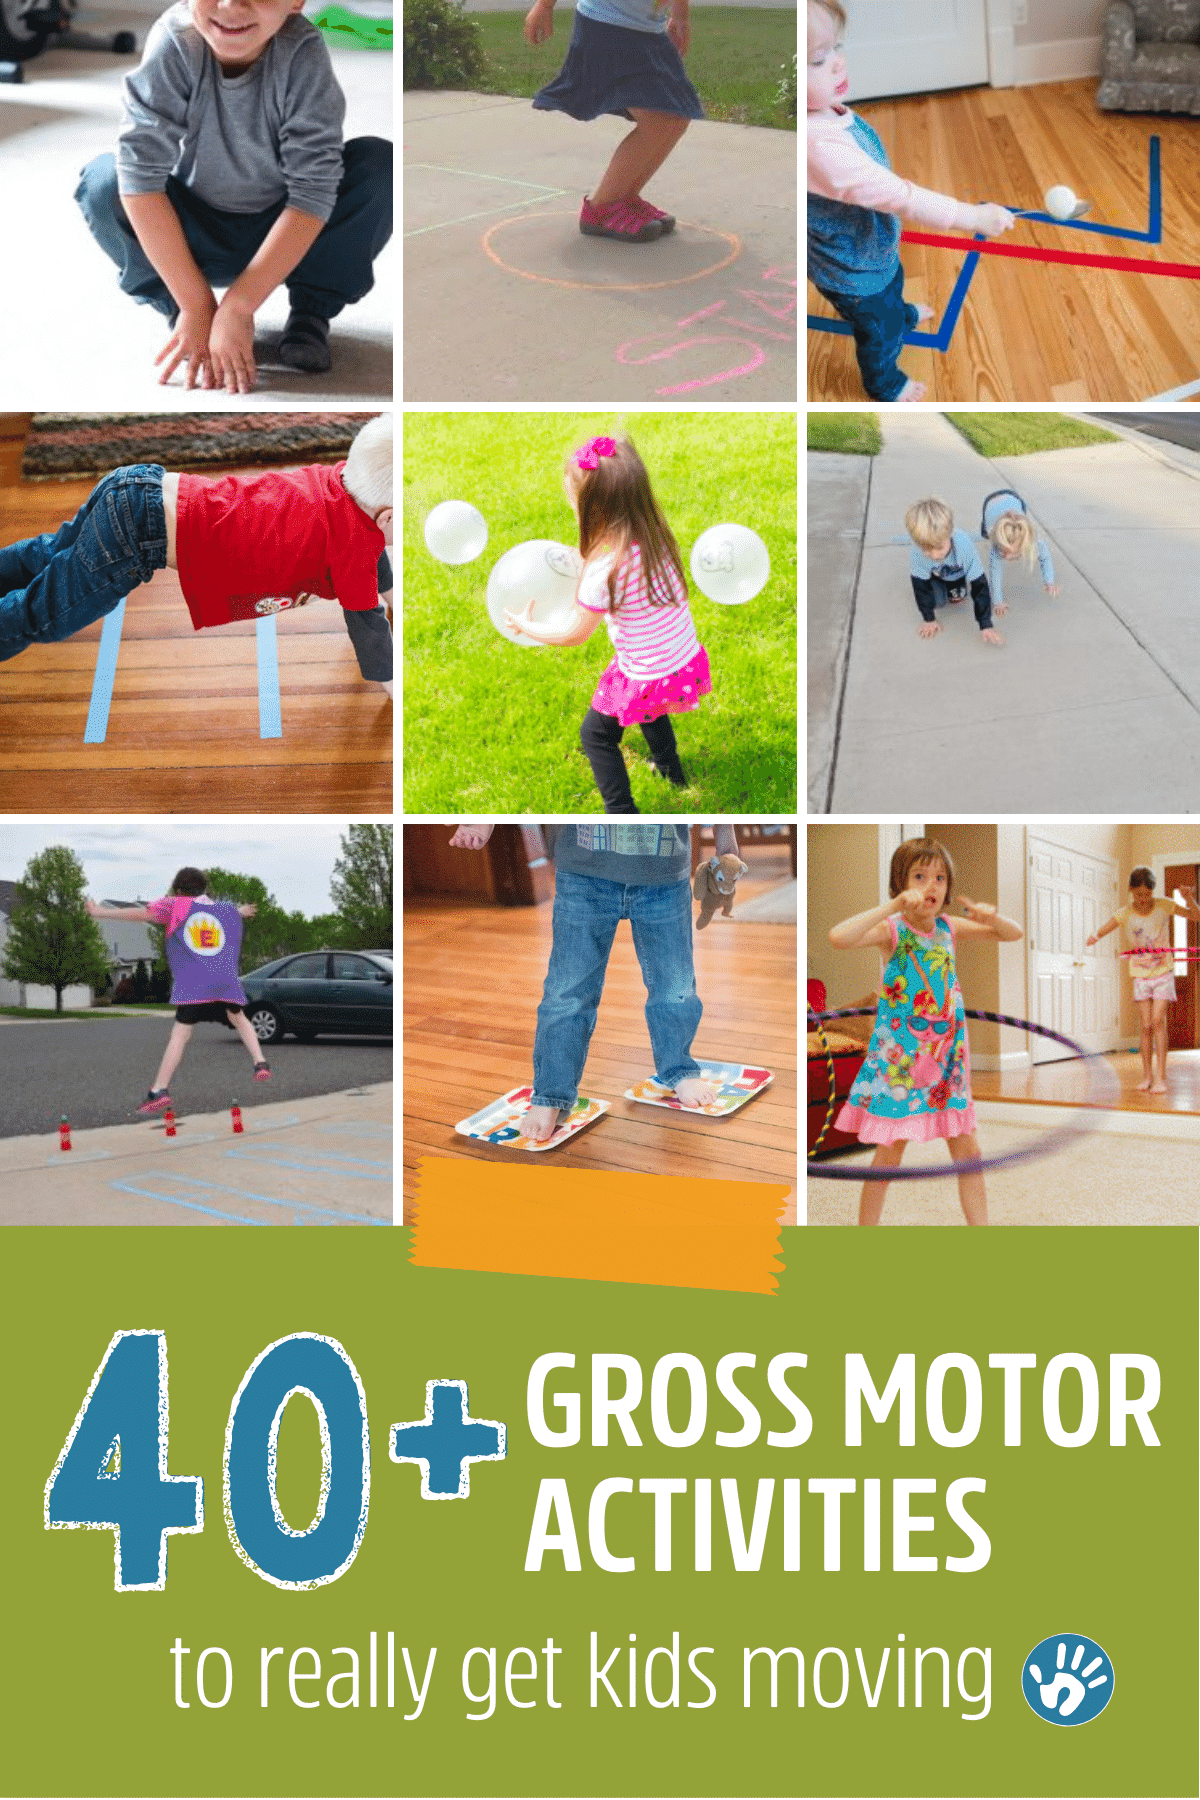 This is such a fun way to get kids moving their bodies outside